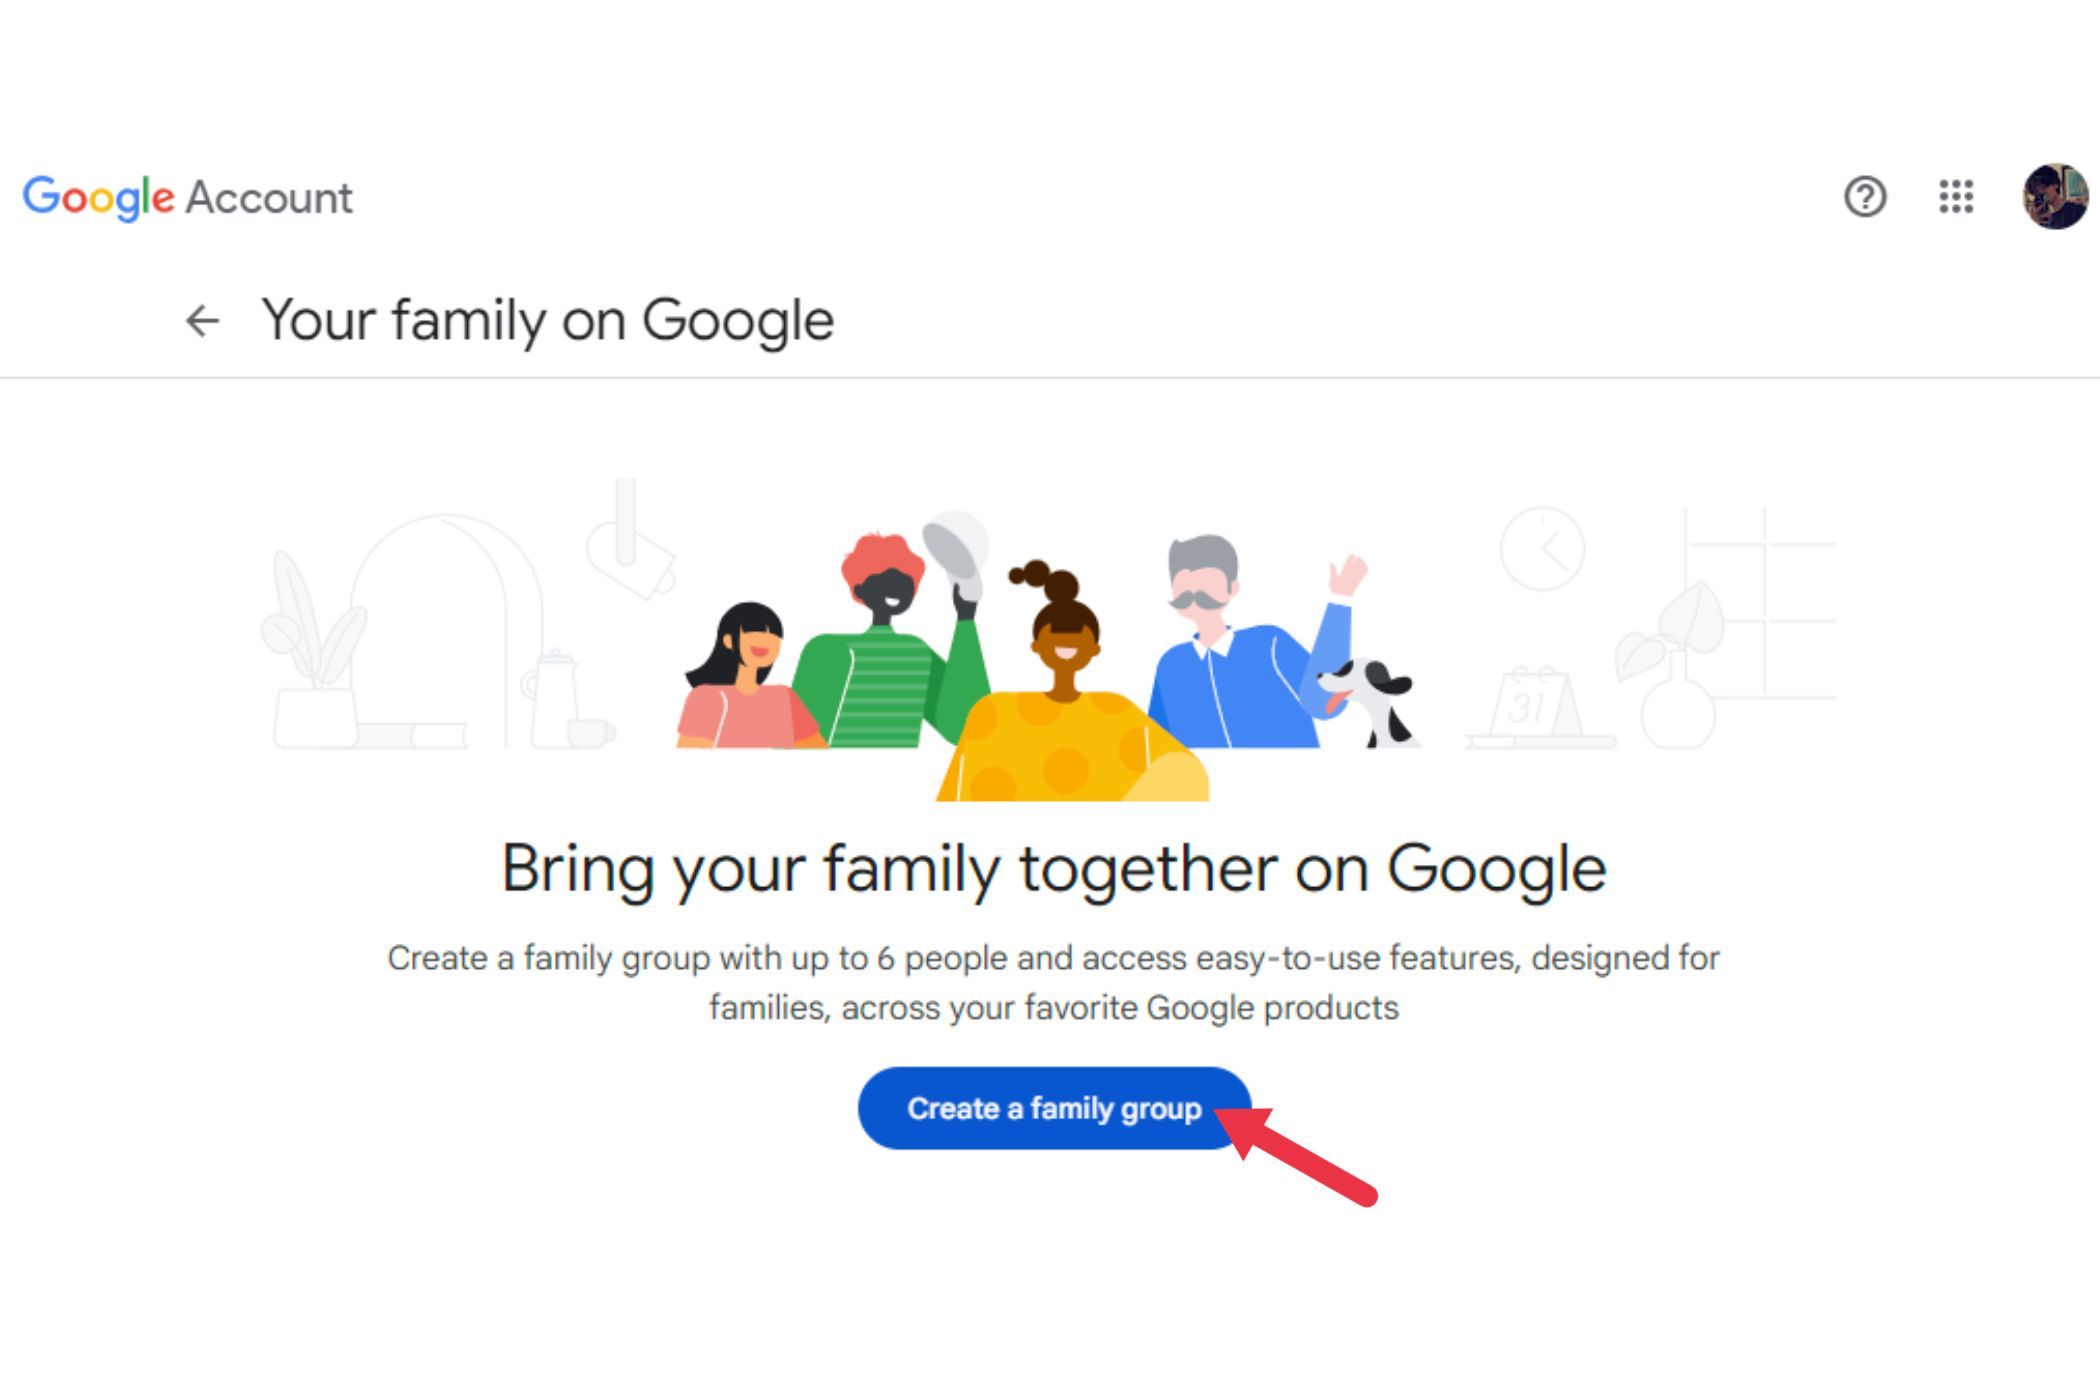 Click on the Create a family group button and confirm your status as a family manager.